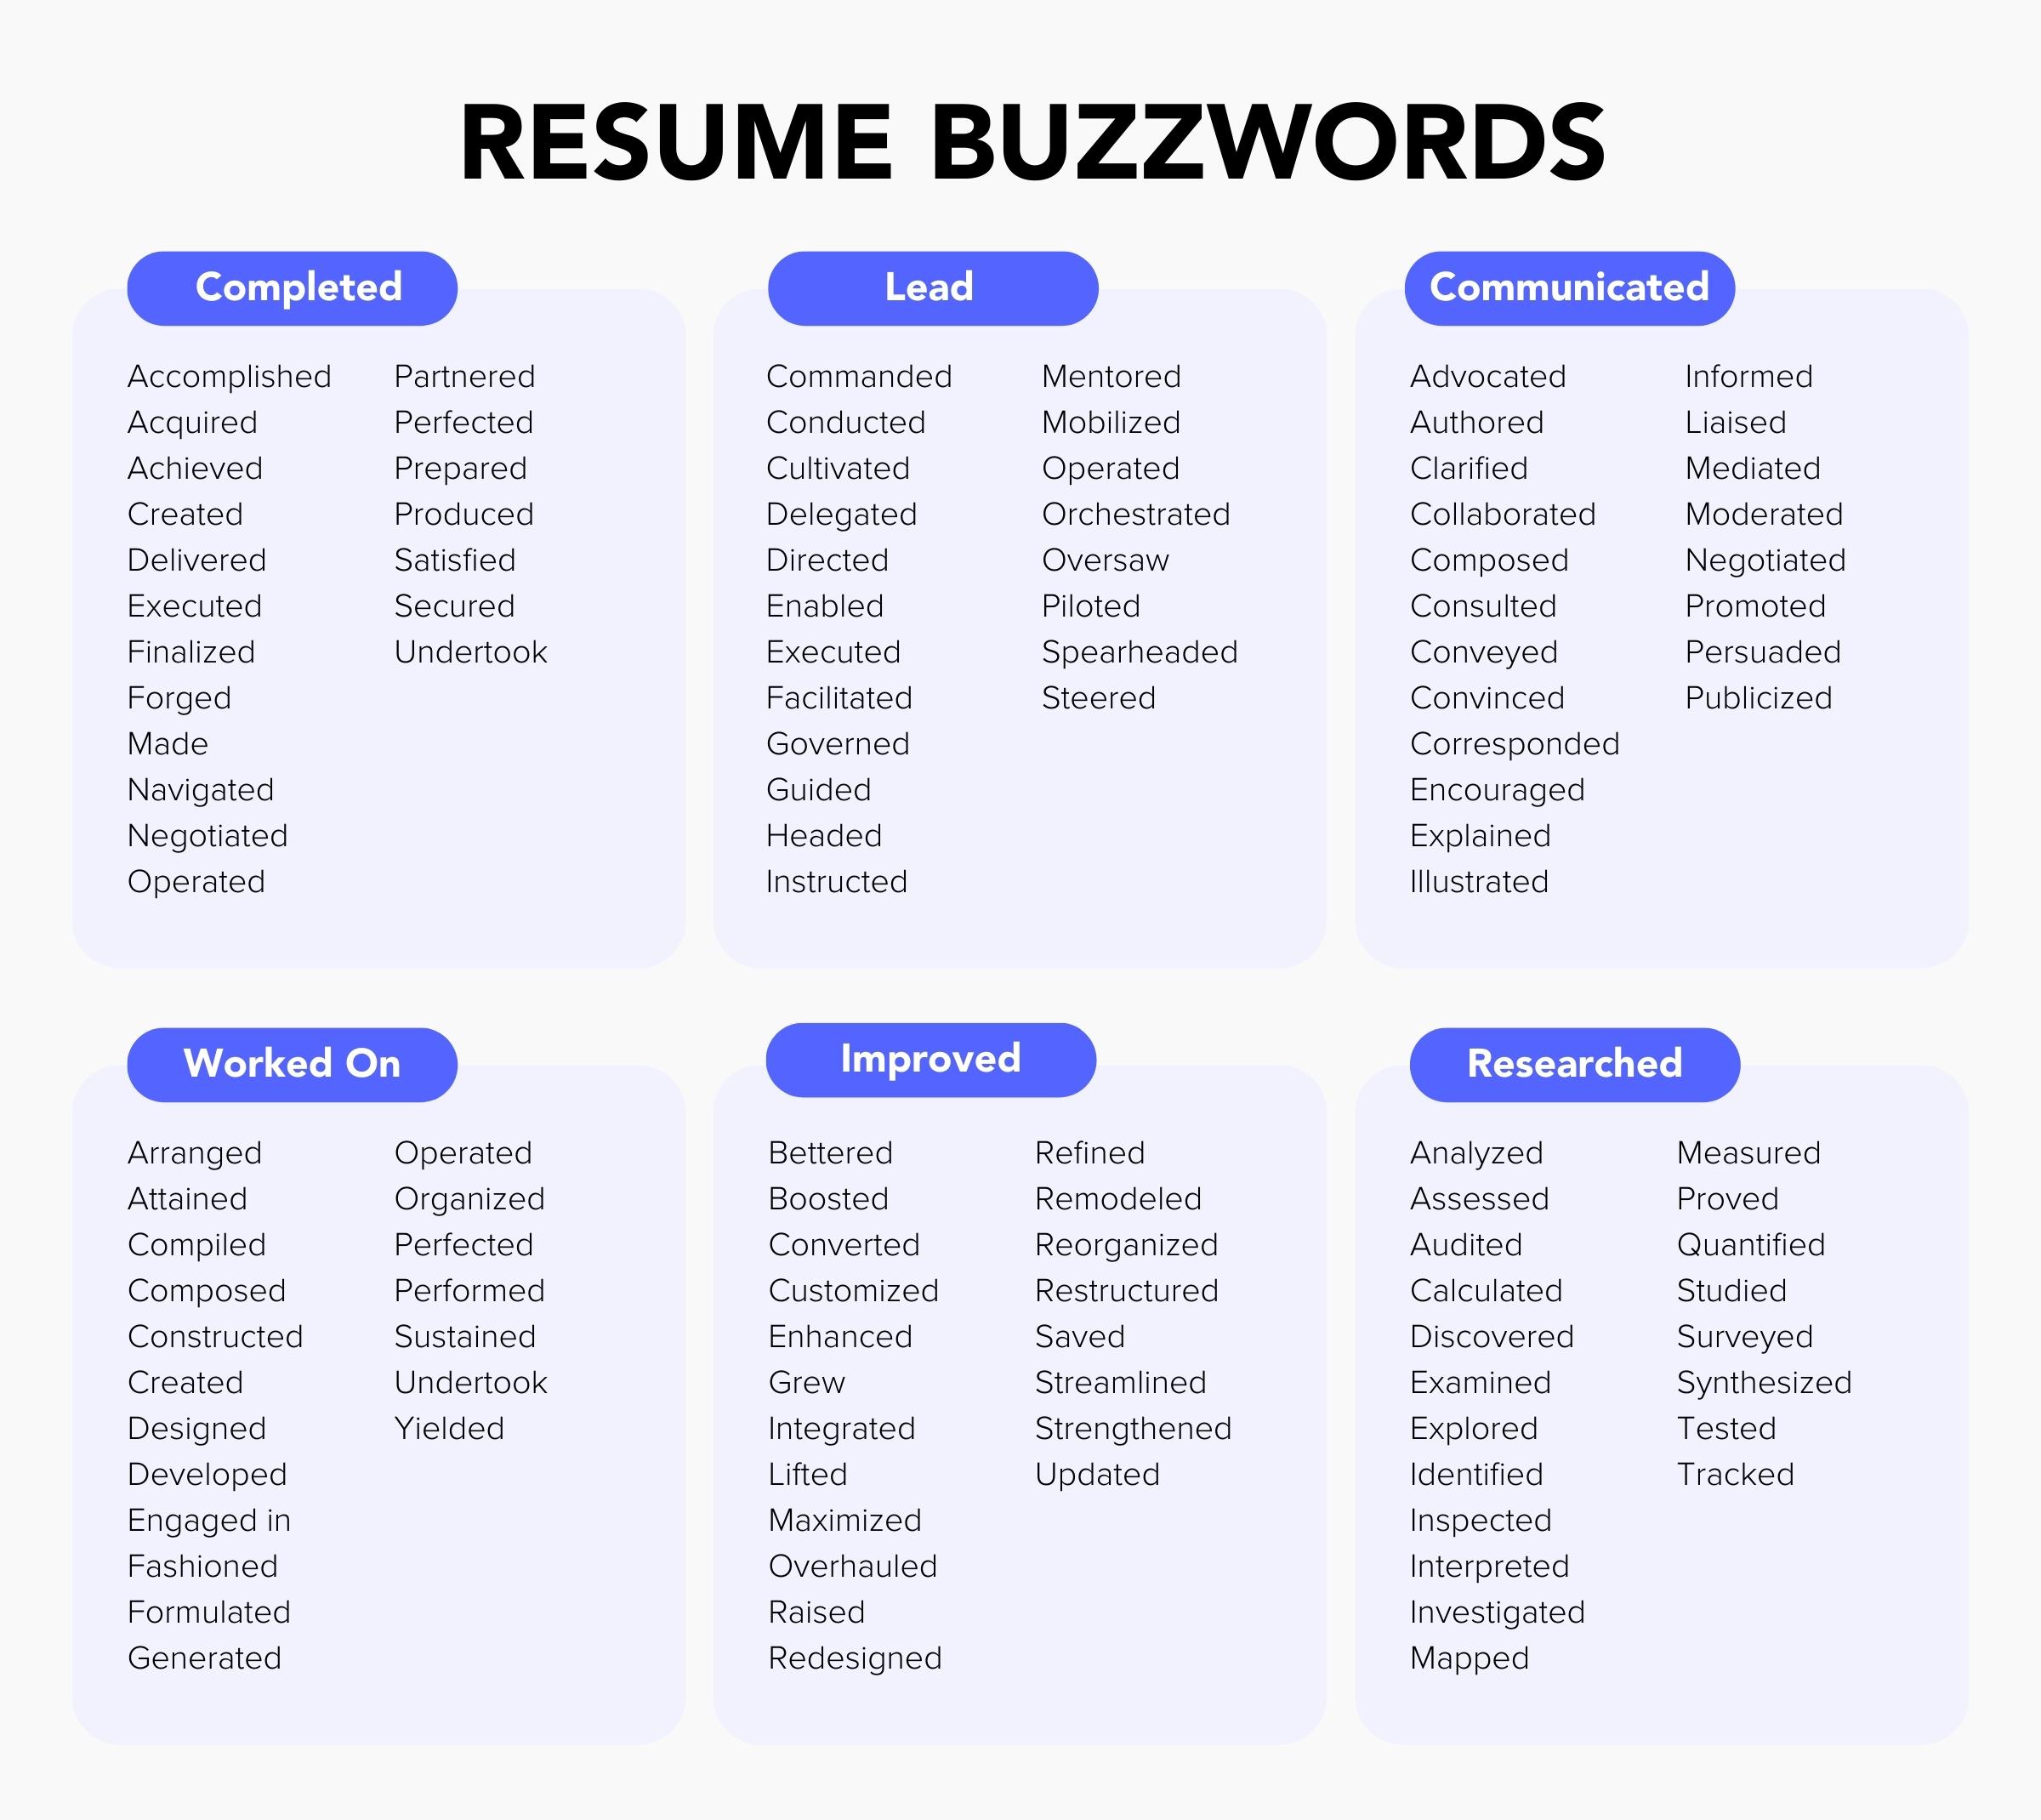 project manager buzzwords resume worded